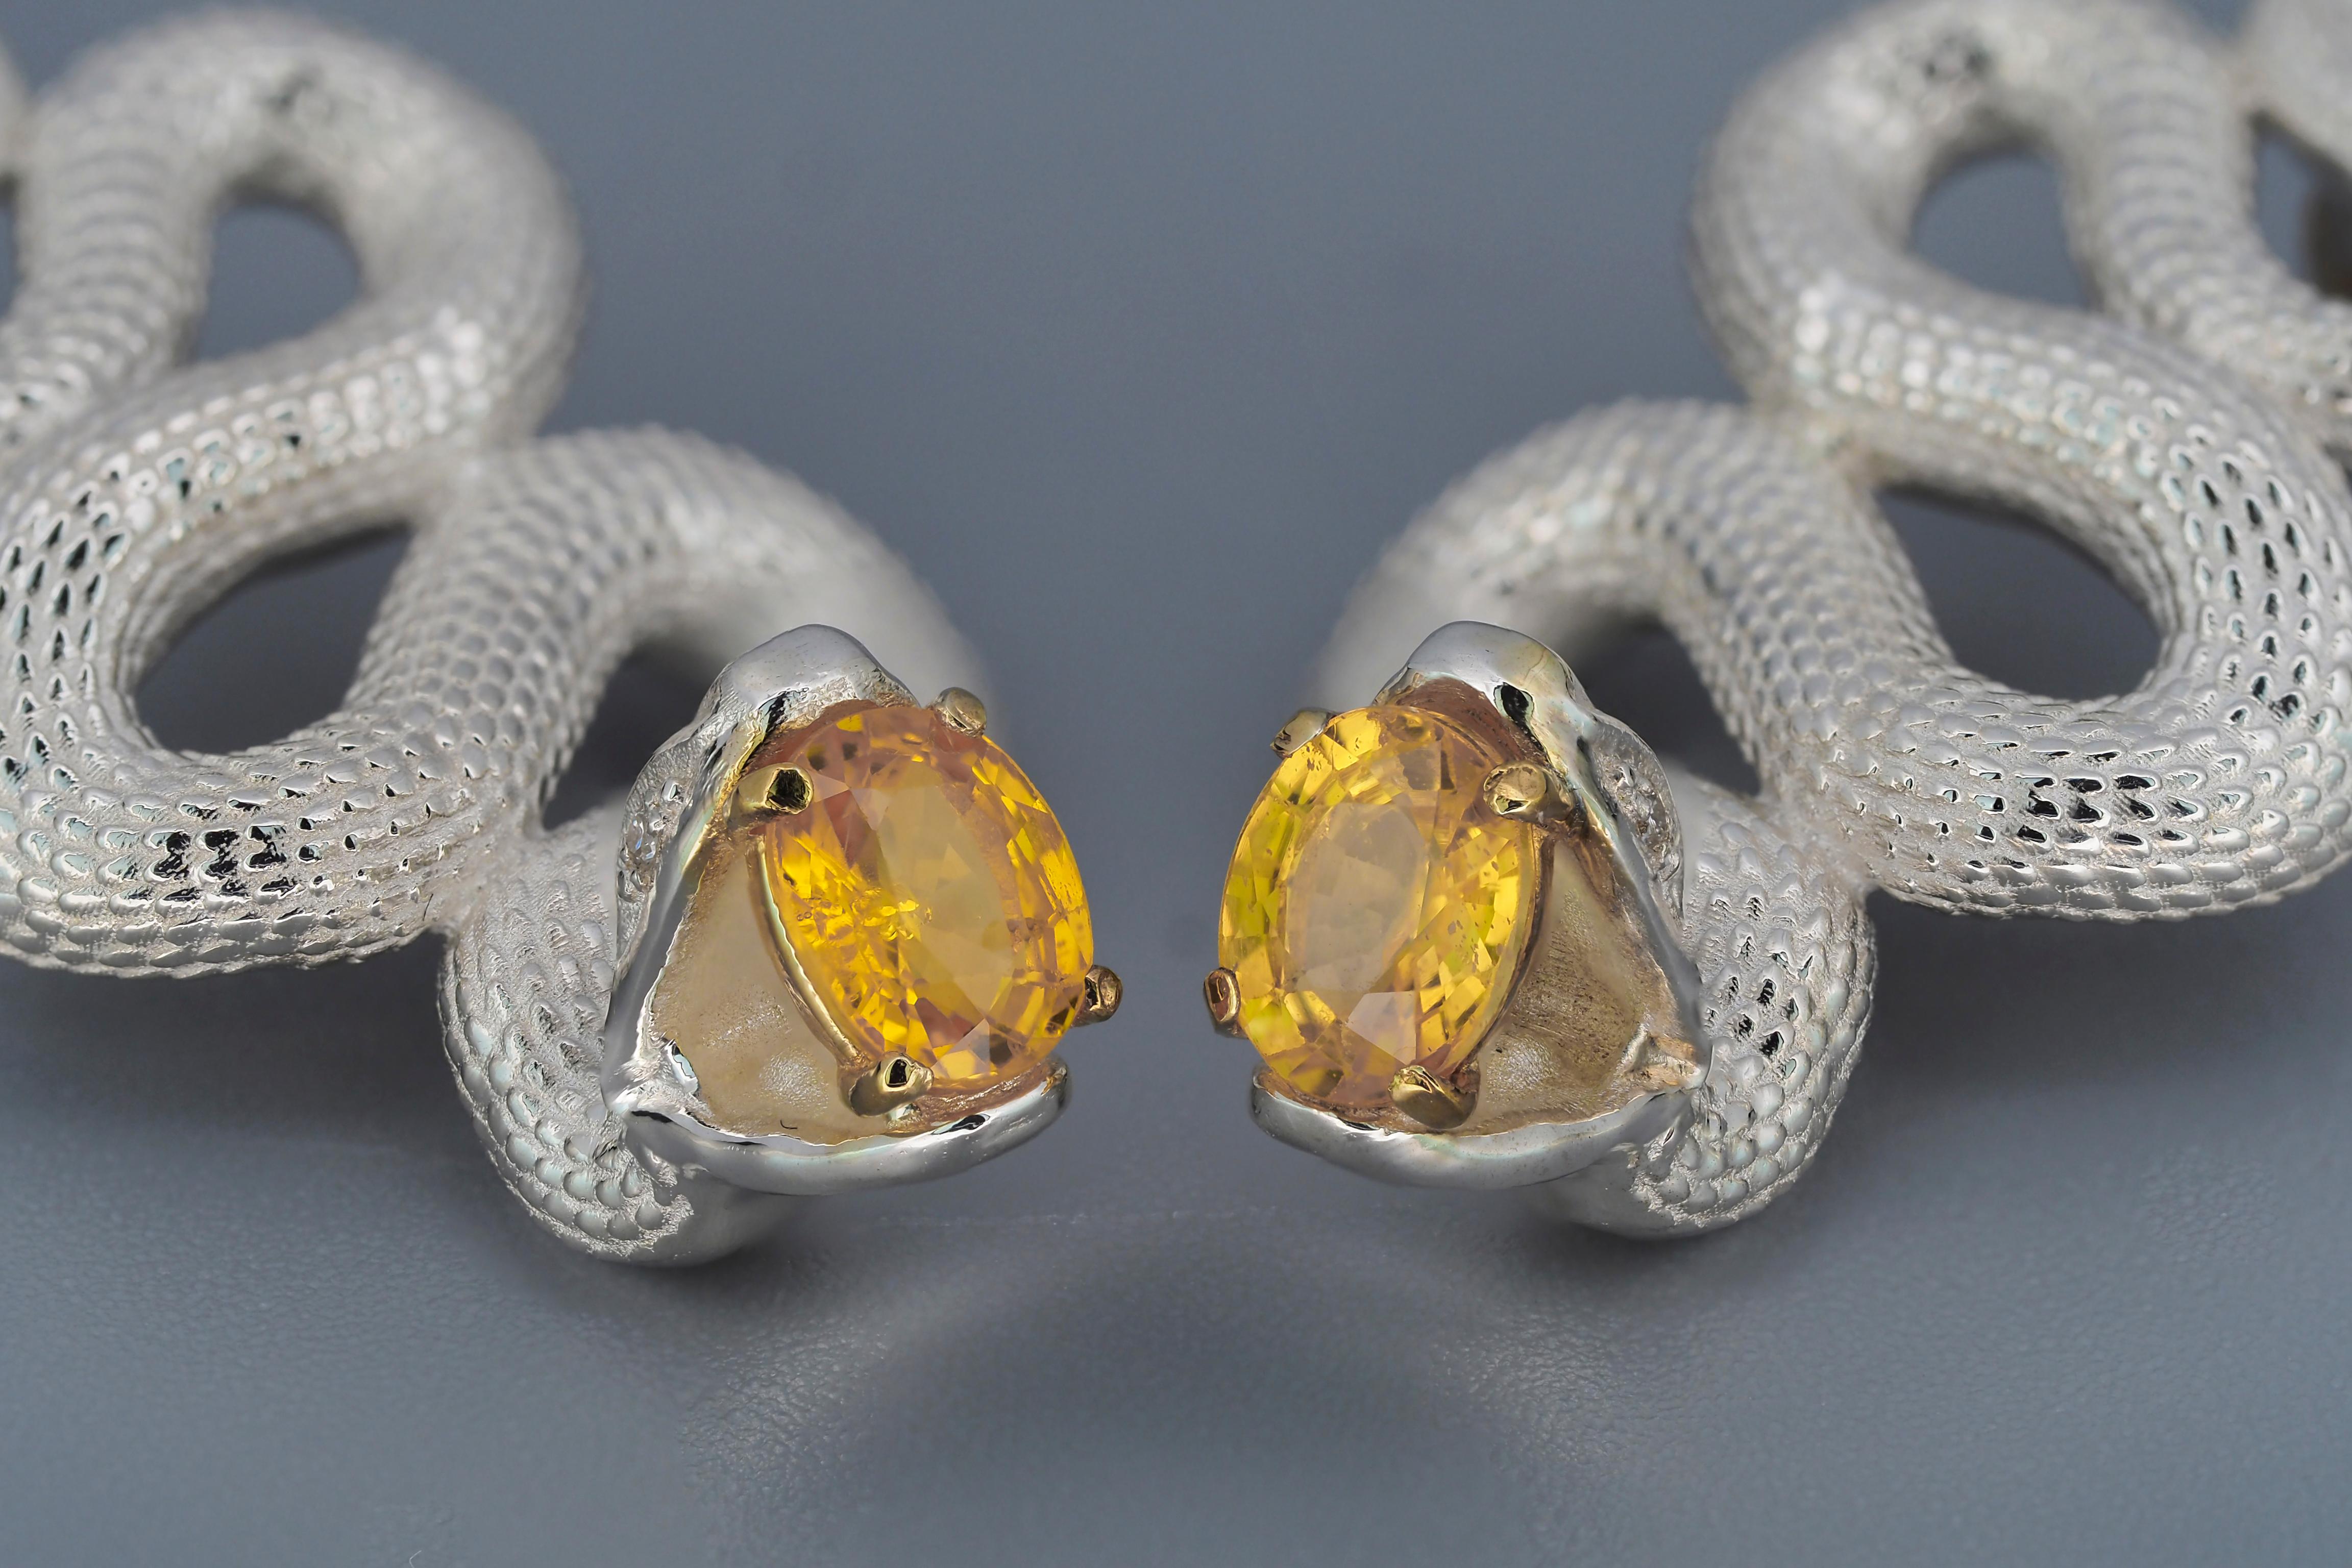 Women's Massive Snake Earrings with Sapphires in Opened Mouth and Diamonds in Eyes For Sale